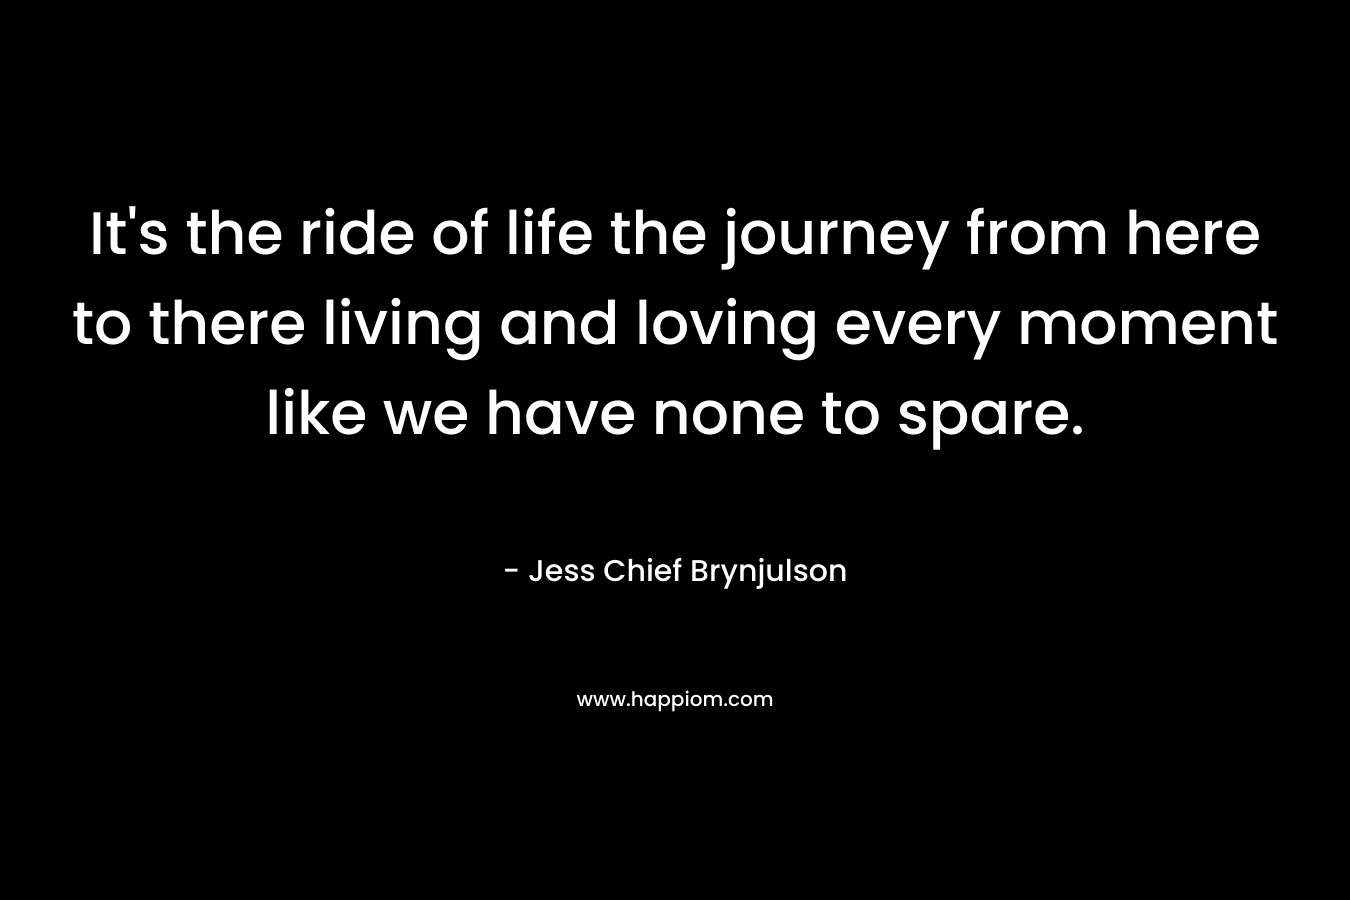 It’s the ride of life the journey from here to there living and loving every moment like we have none to spare. – Jess Chief Brynjulson